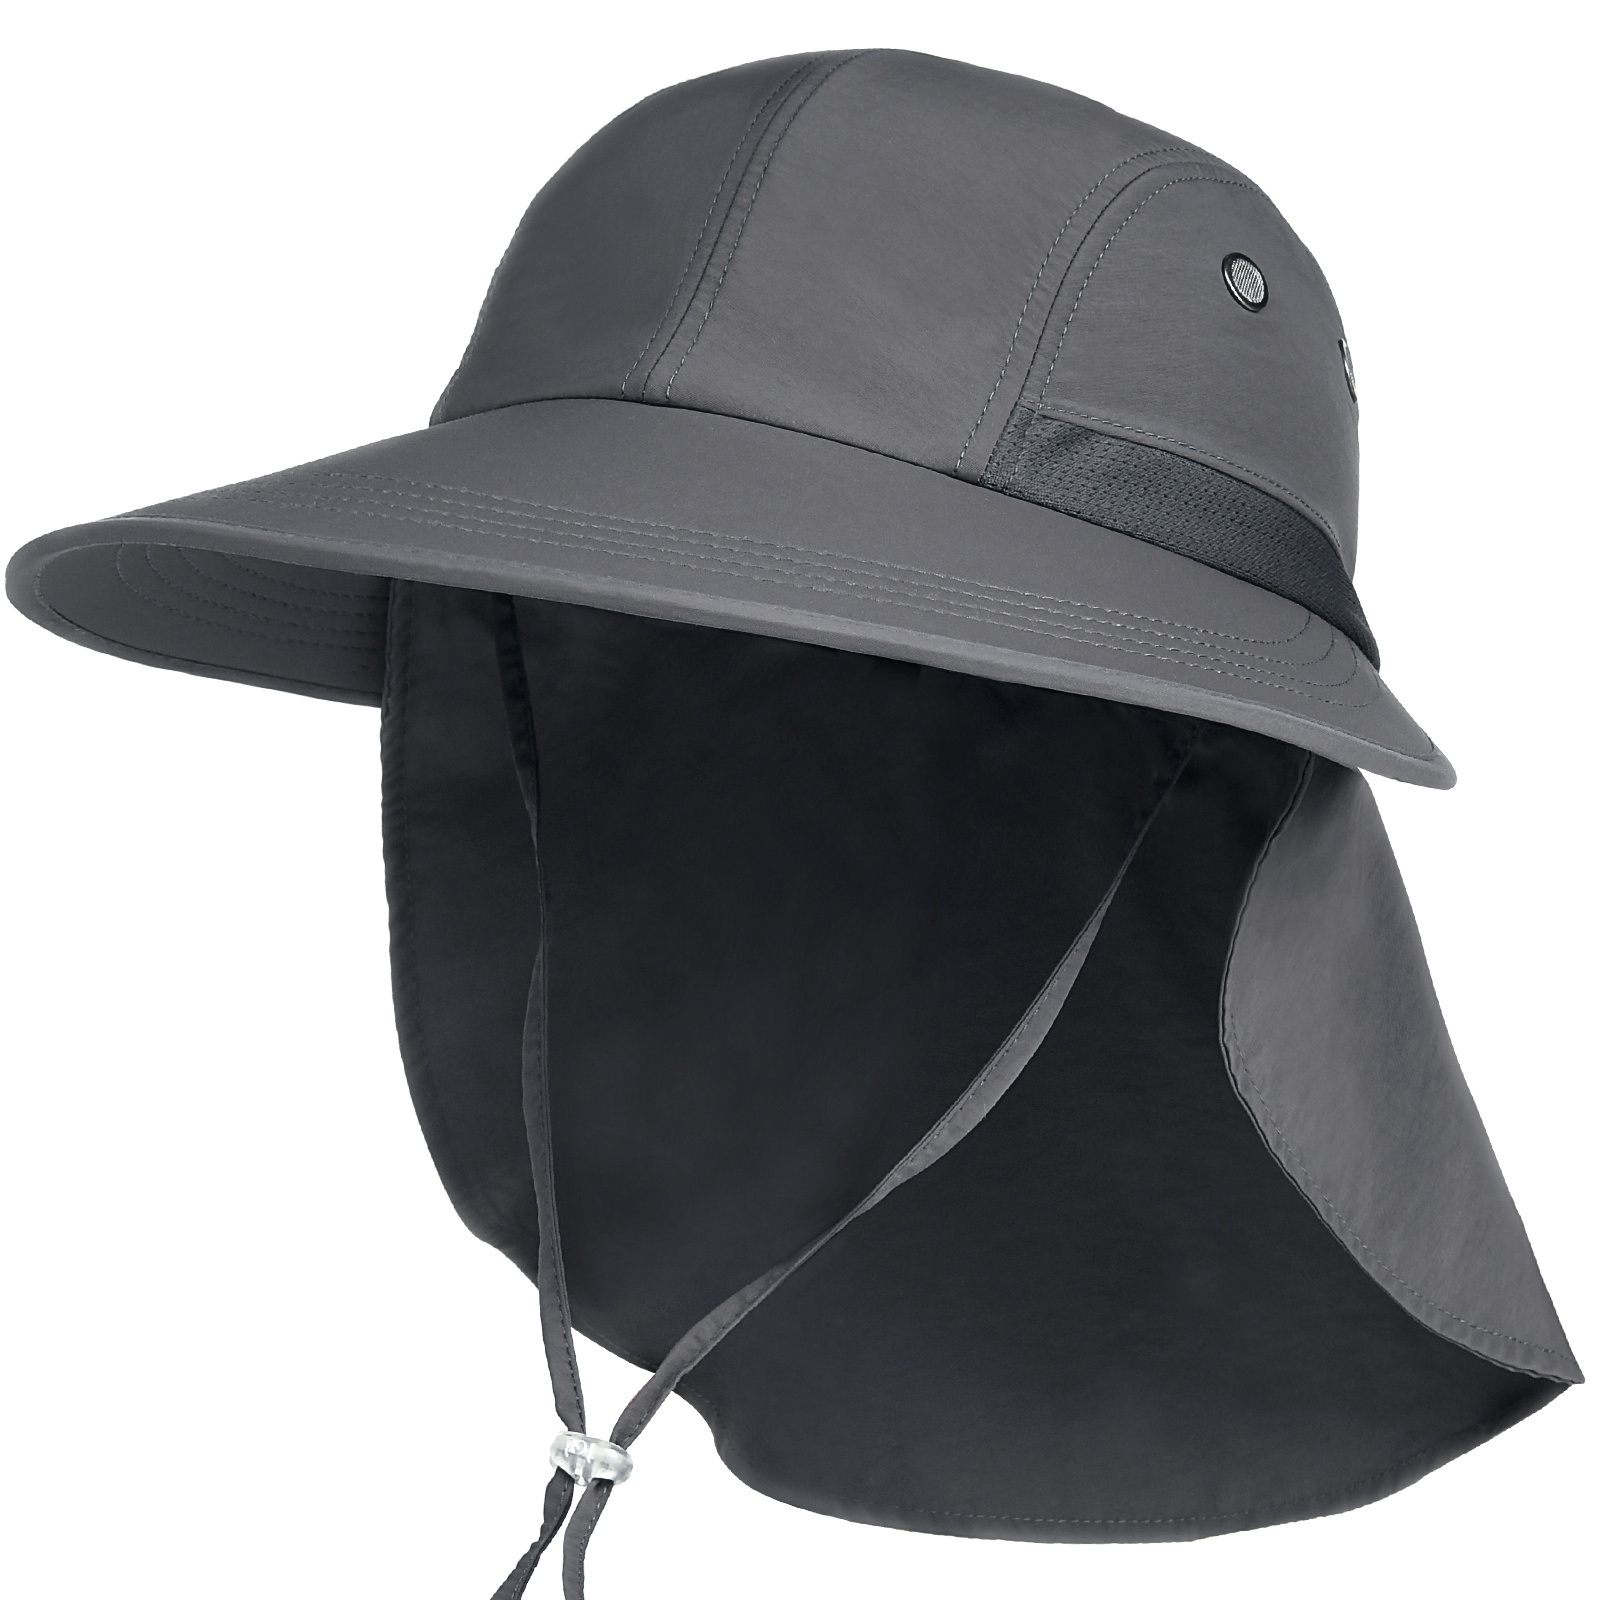 Wide Brim Upf 50 Hiking And Fishing Hat With Neck Flap Sun Protection  Outdoor Safari Gardening Hats For Women Men, Don't Miss These Great Deals